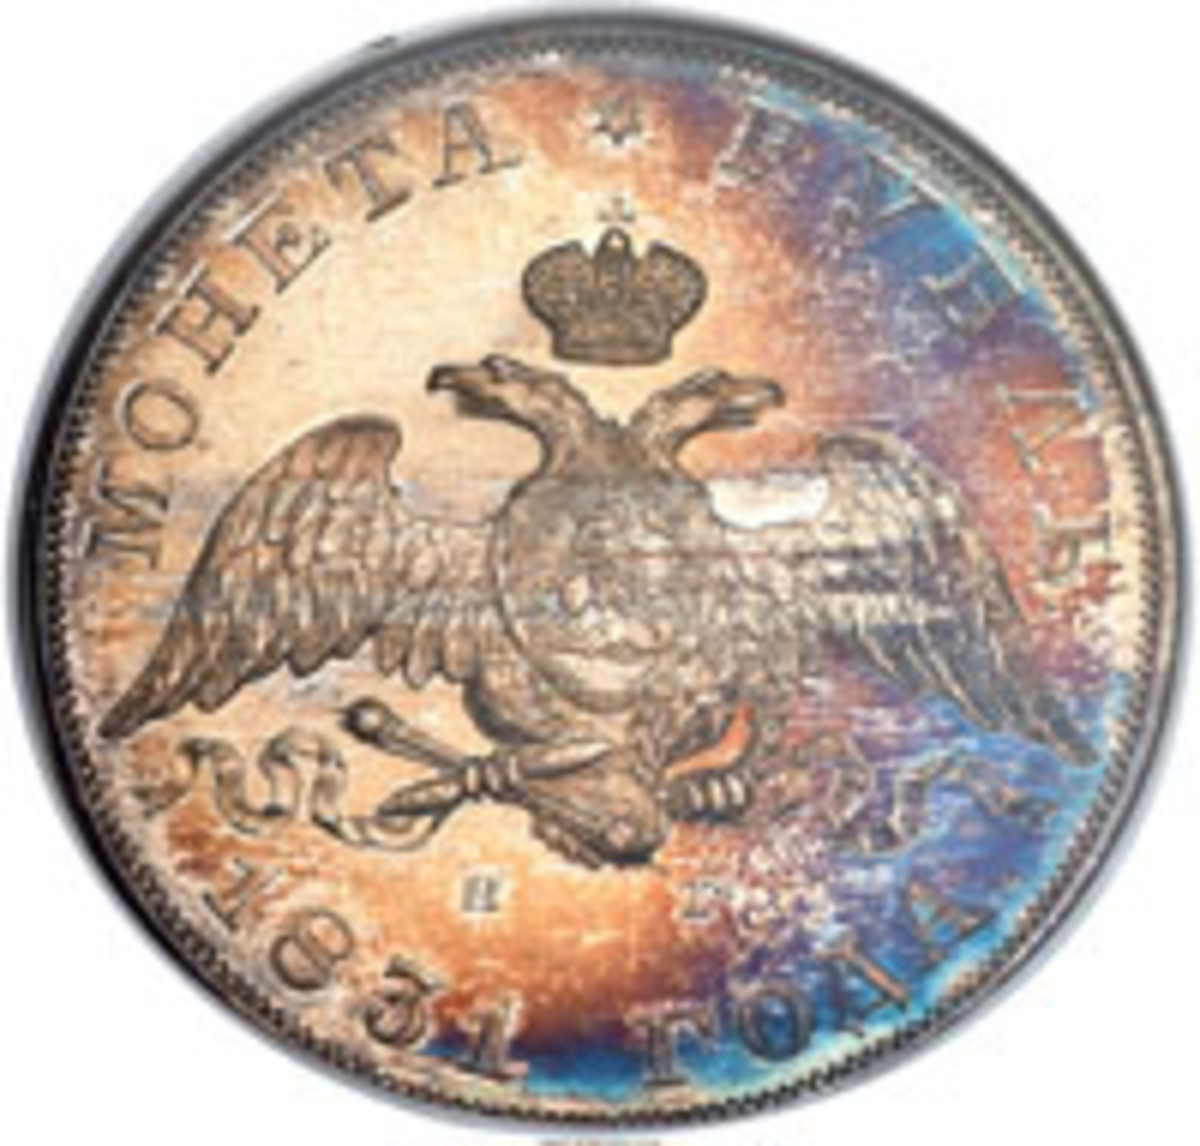  Obverse of top-priced Nicholas I proof ruble of 1831, KM-C131, from the Heritage Auctions Long Beach sale. Graded PR64 NGC and with a superb toning it realized $45,600. (Image courtesy and © www.ha.com)